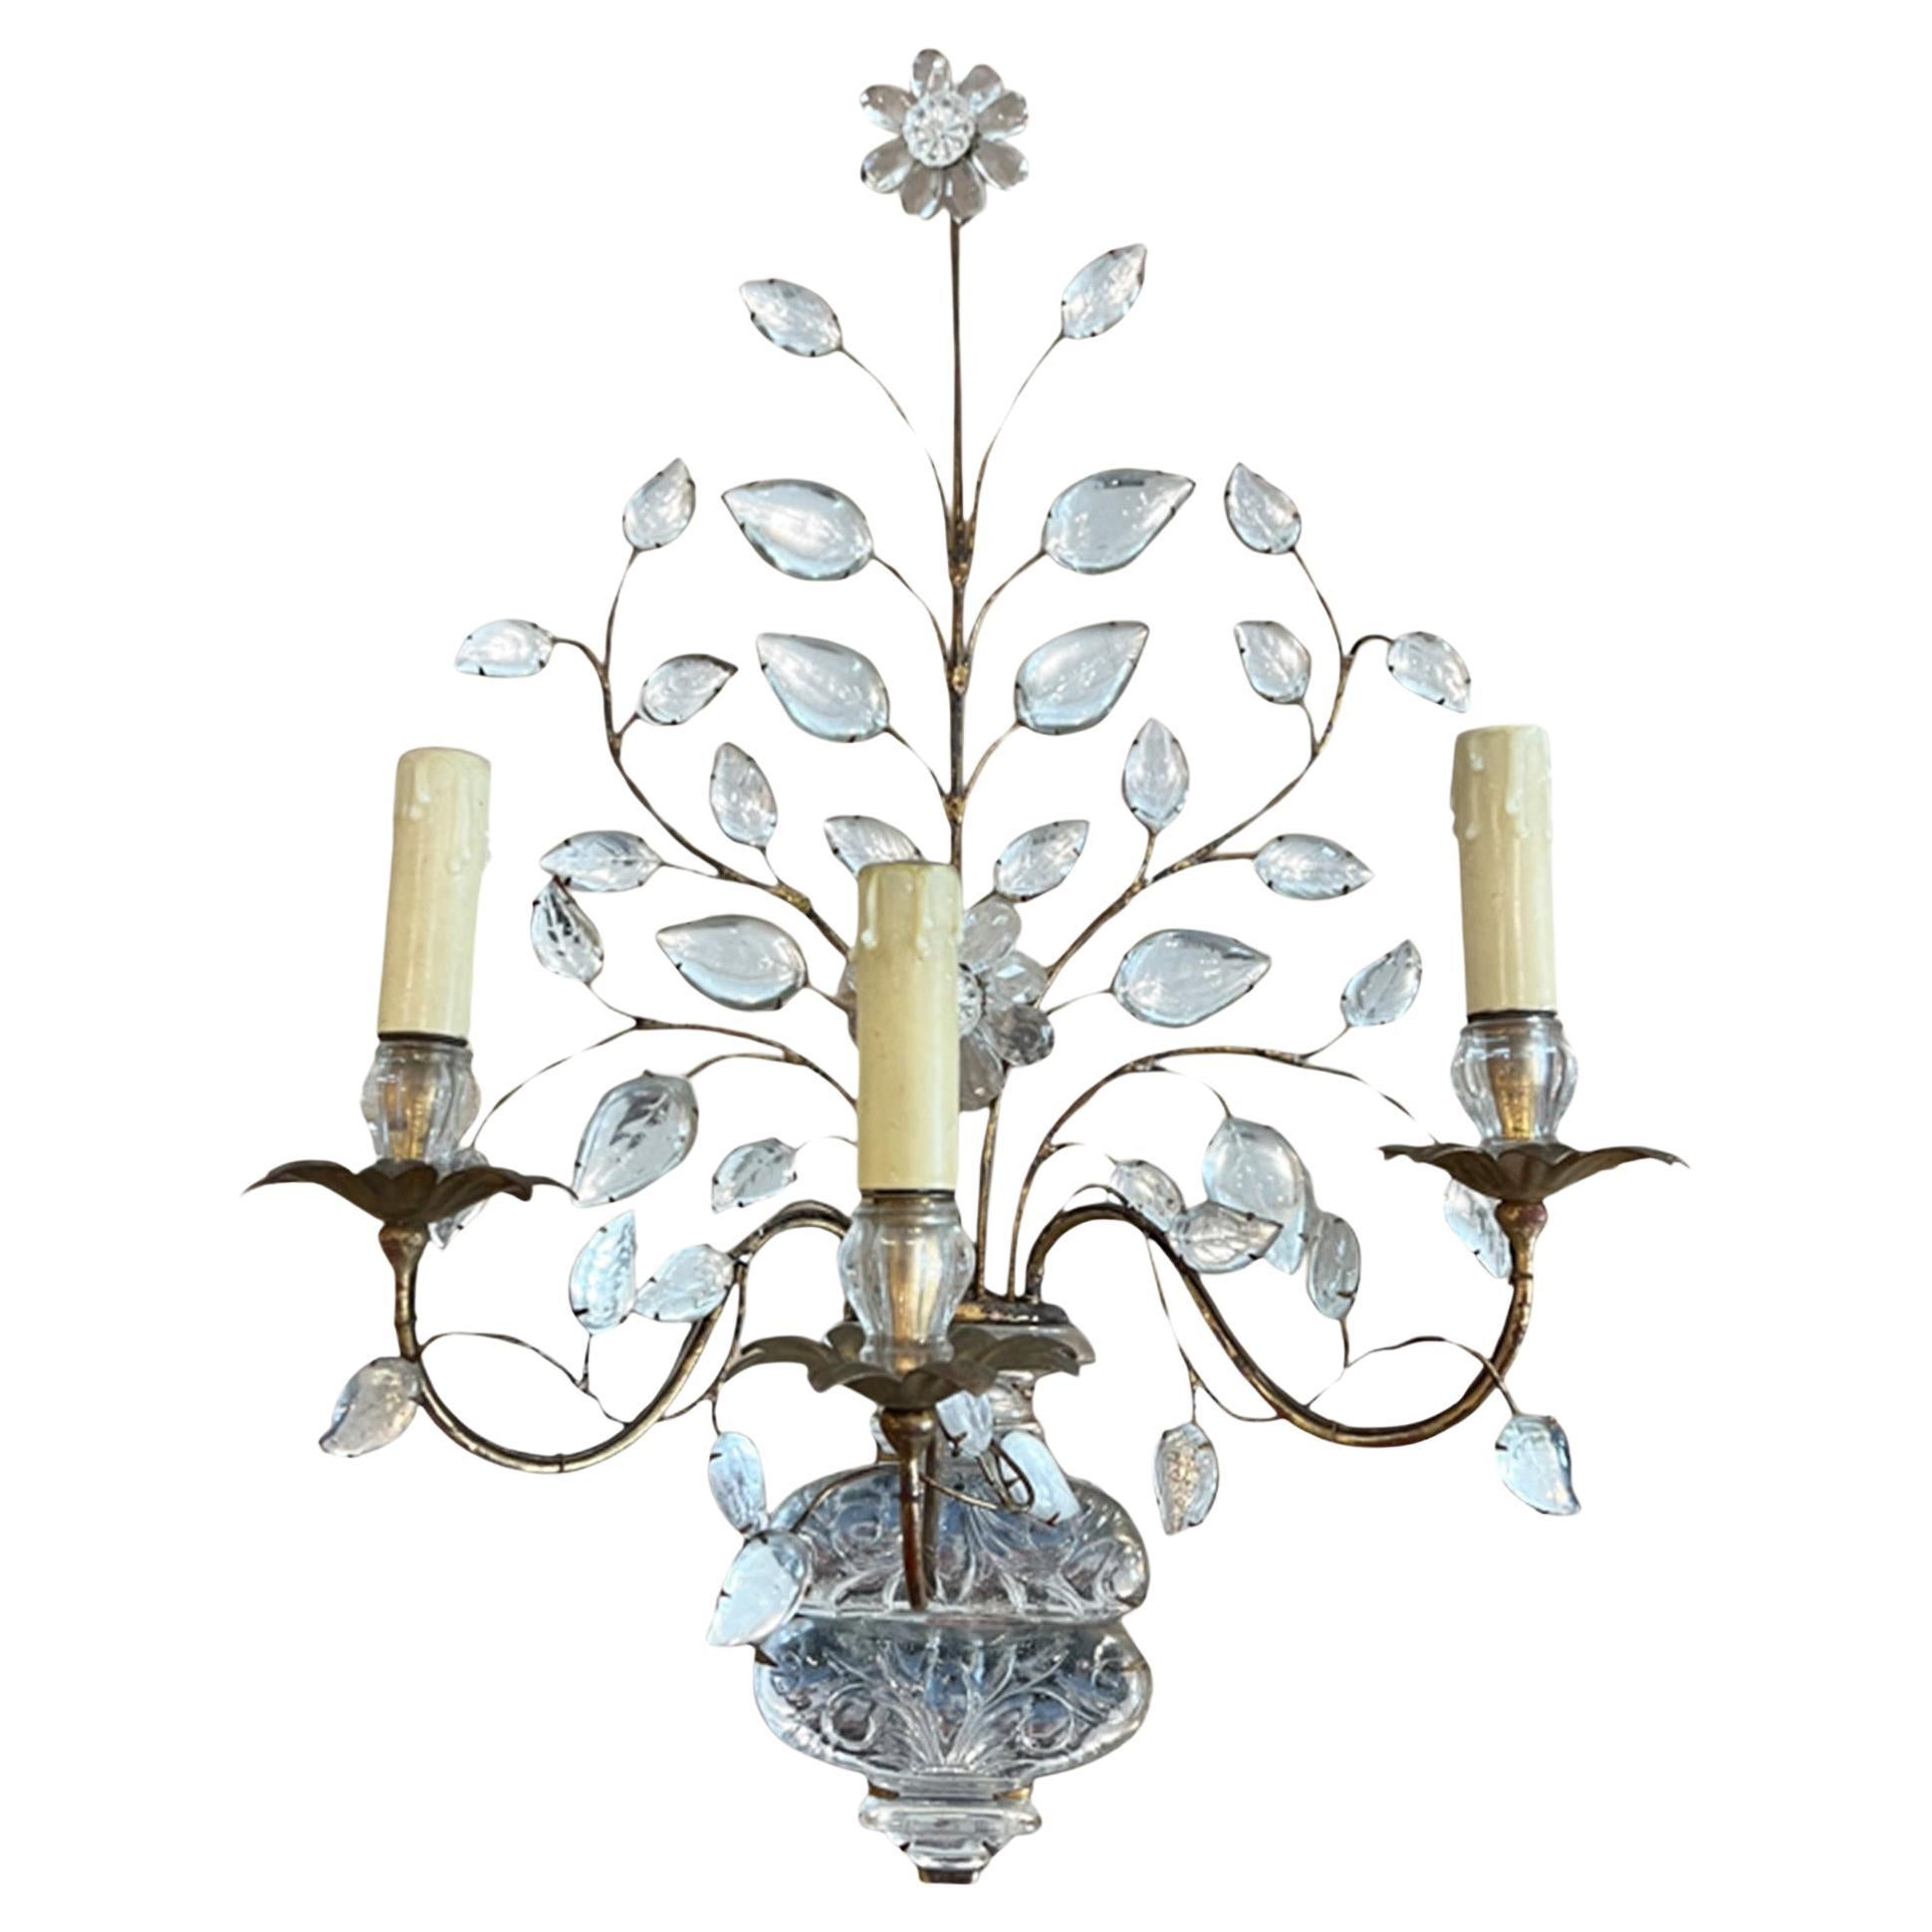 Large Maison Baguès Wall Sconces With Urns and Flowers For Sale